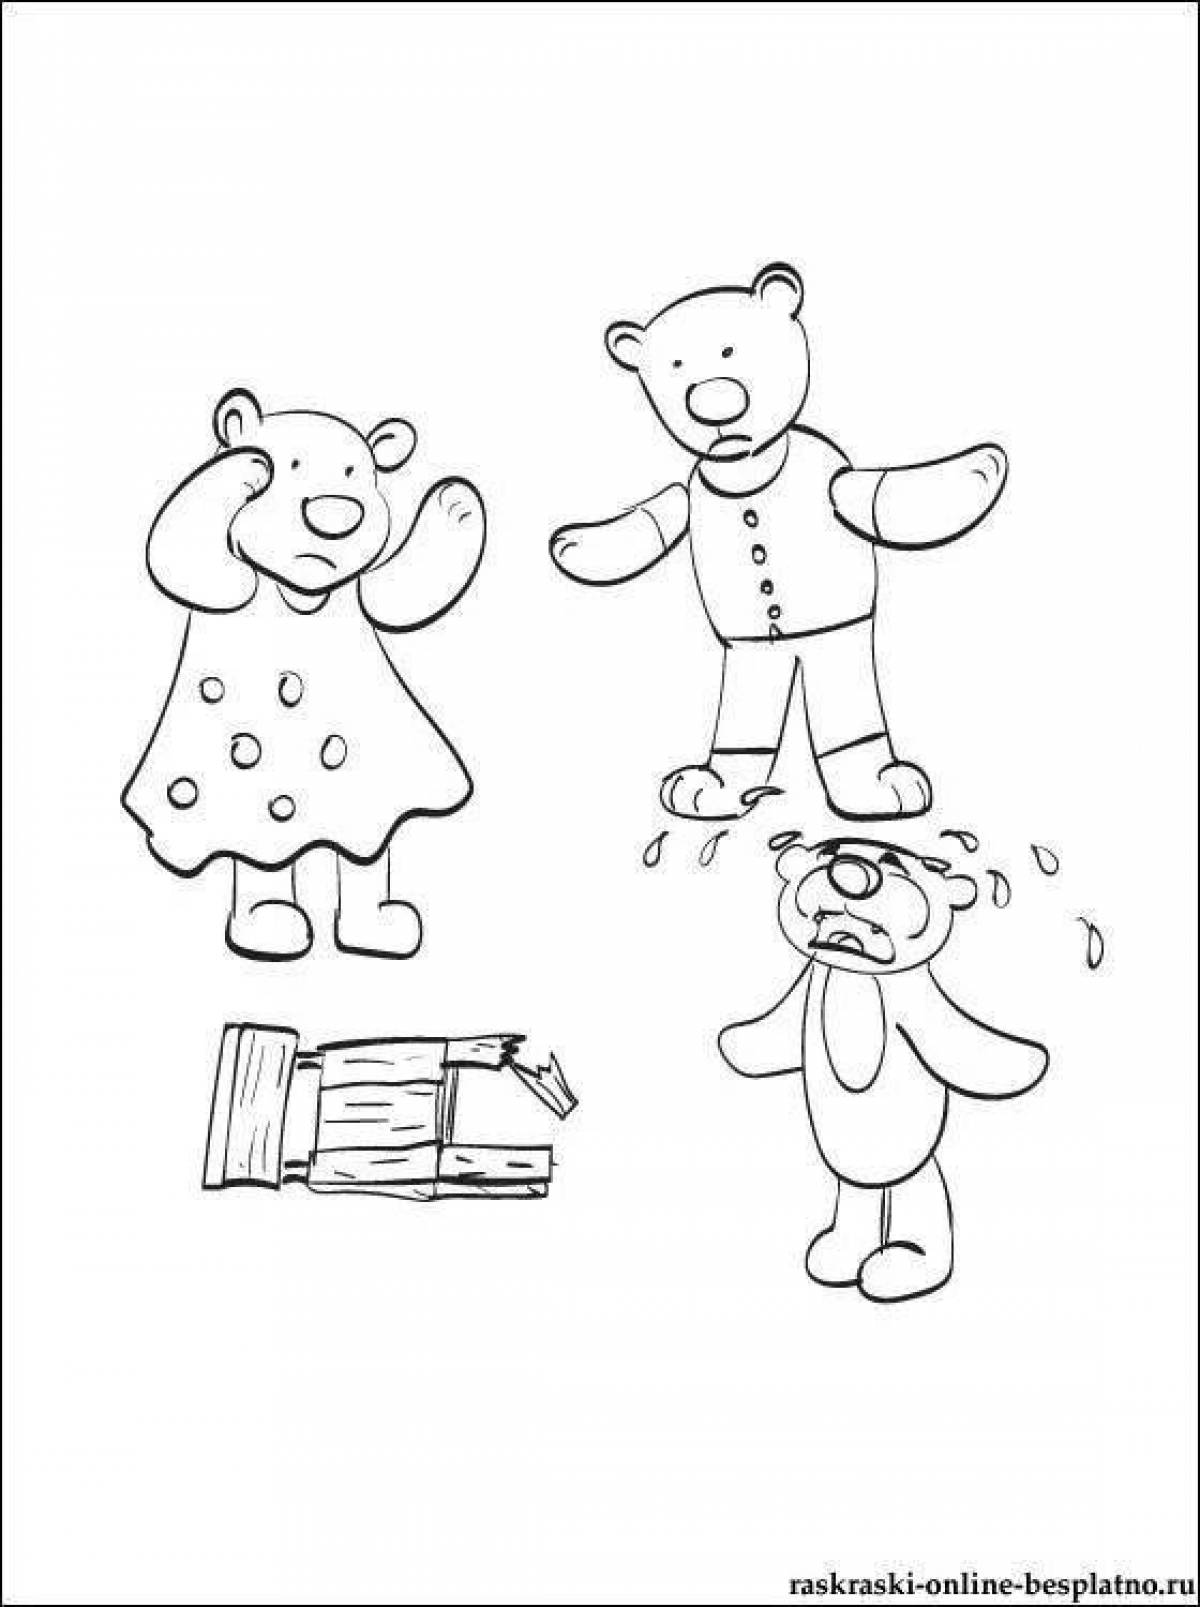 Three bears funny coloring book